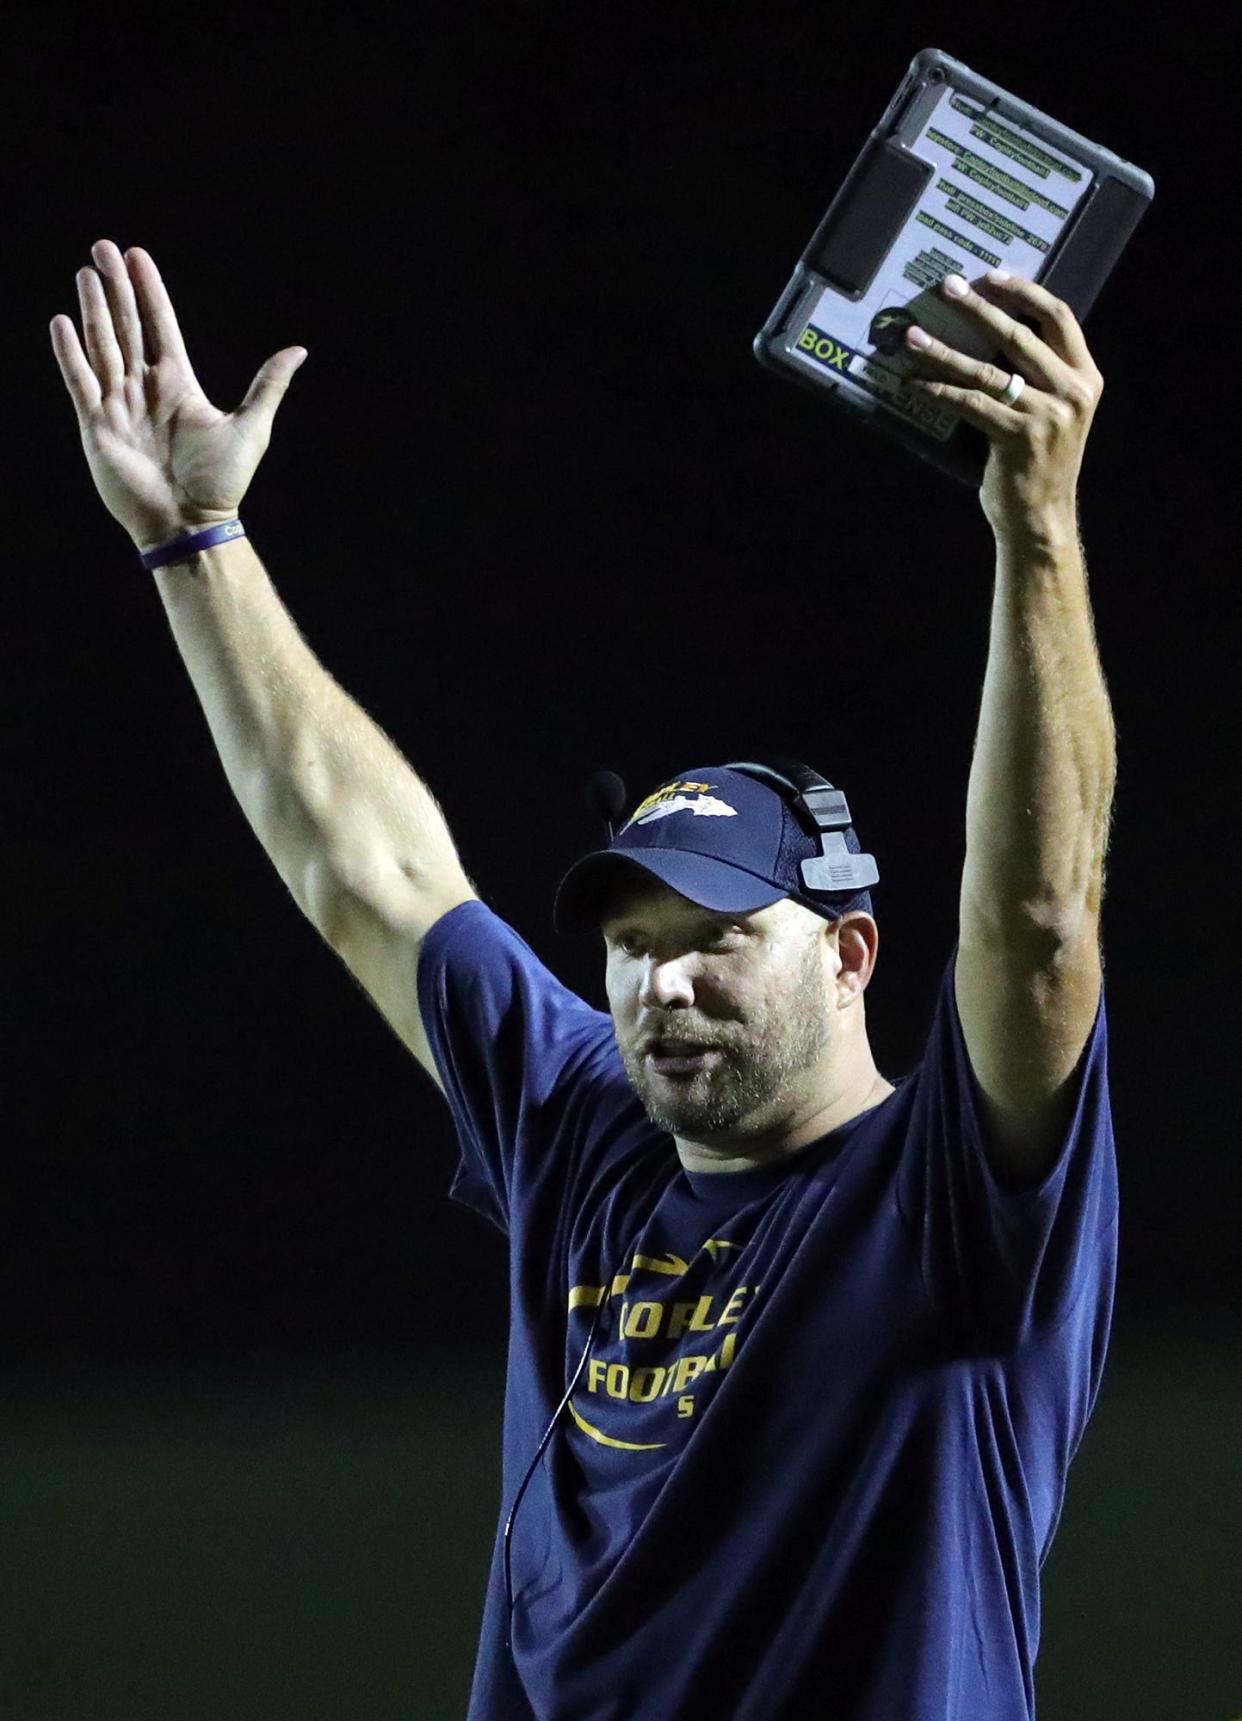 Copley football coach Jake Parsons celebrates a touchdown during the second half of a high school football game, Friday, Aug. 20, 2021, in Copley, Ohio.